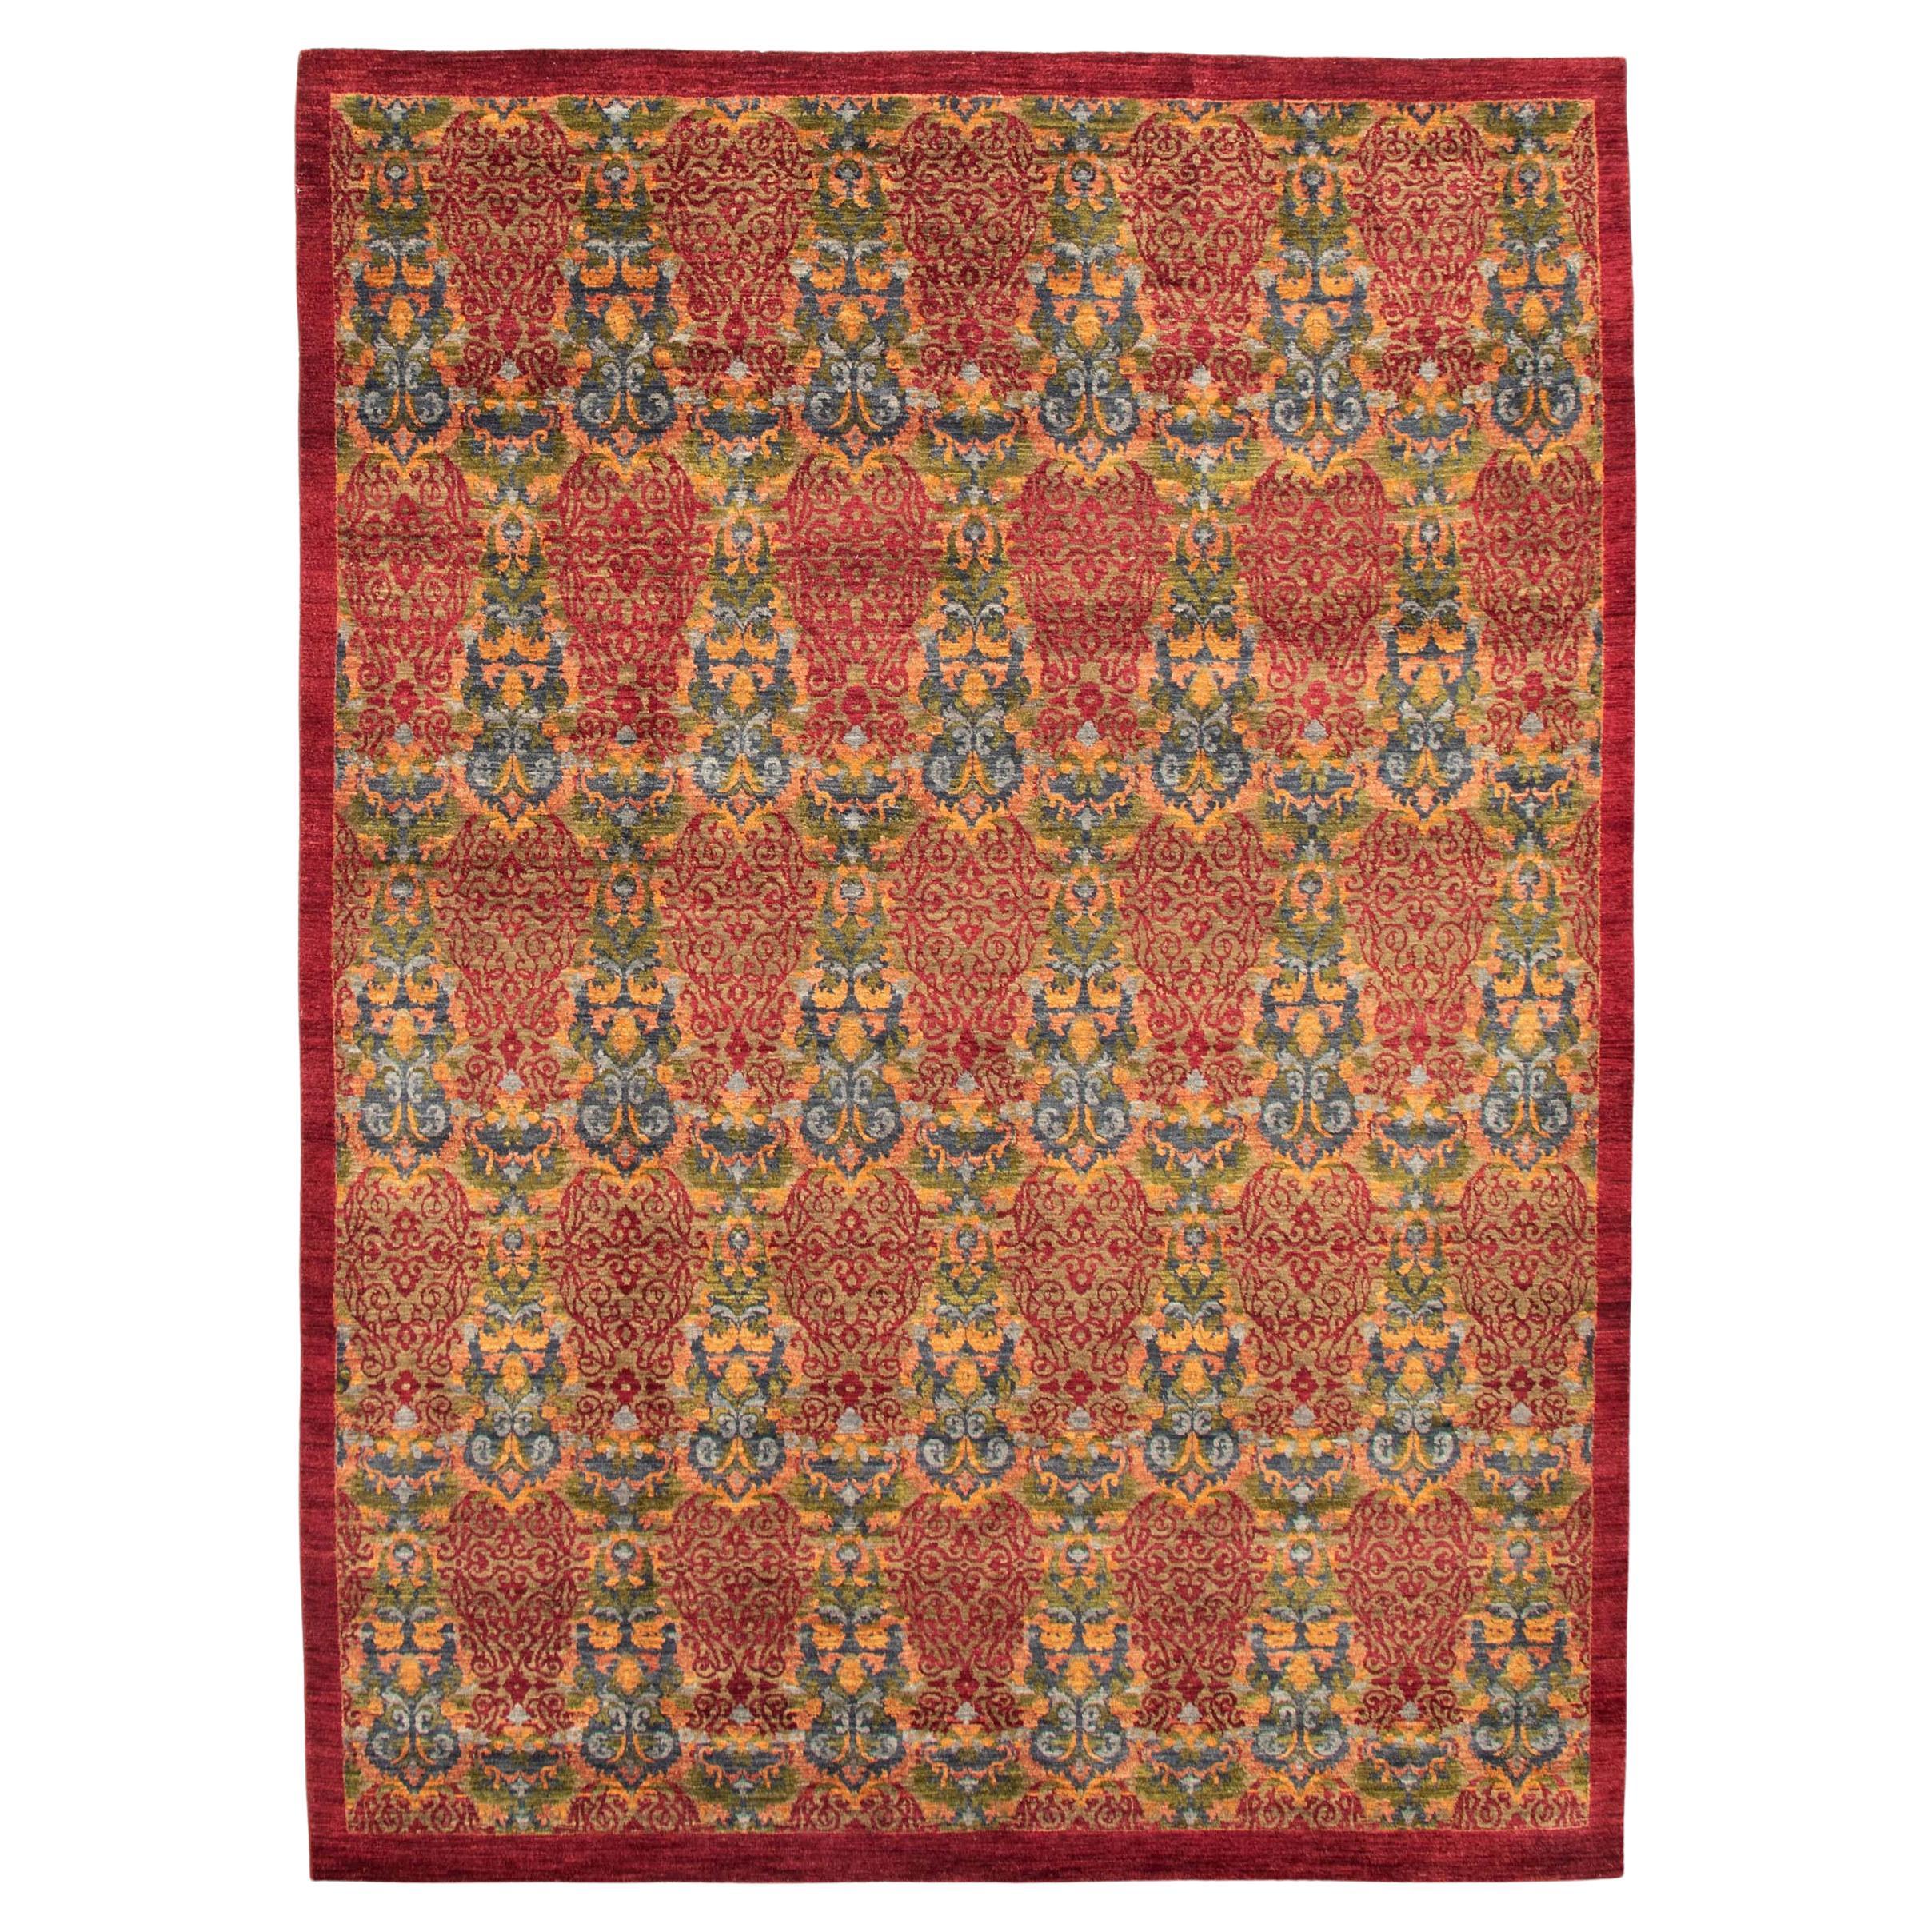 Lahore Carpet, Transitional, Red, Taupe, Blue, and Green, Wool, 8’ x 10’ For Sale